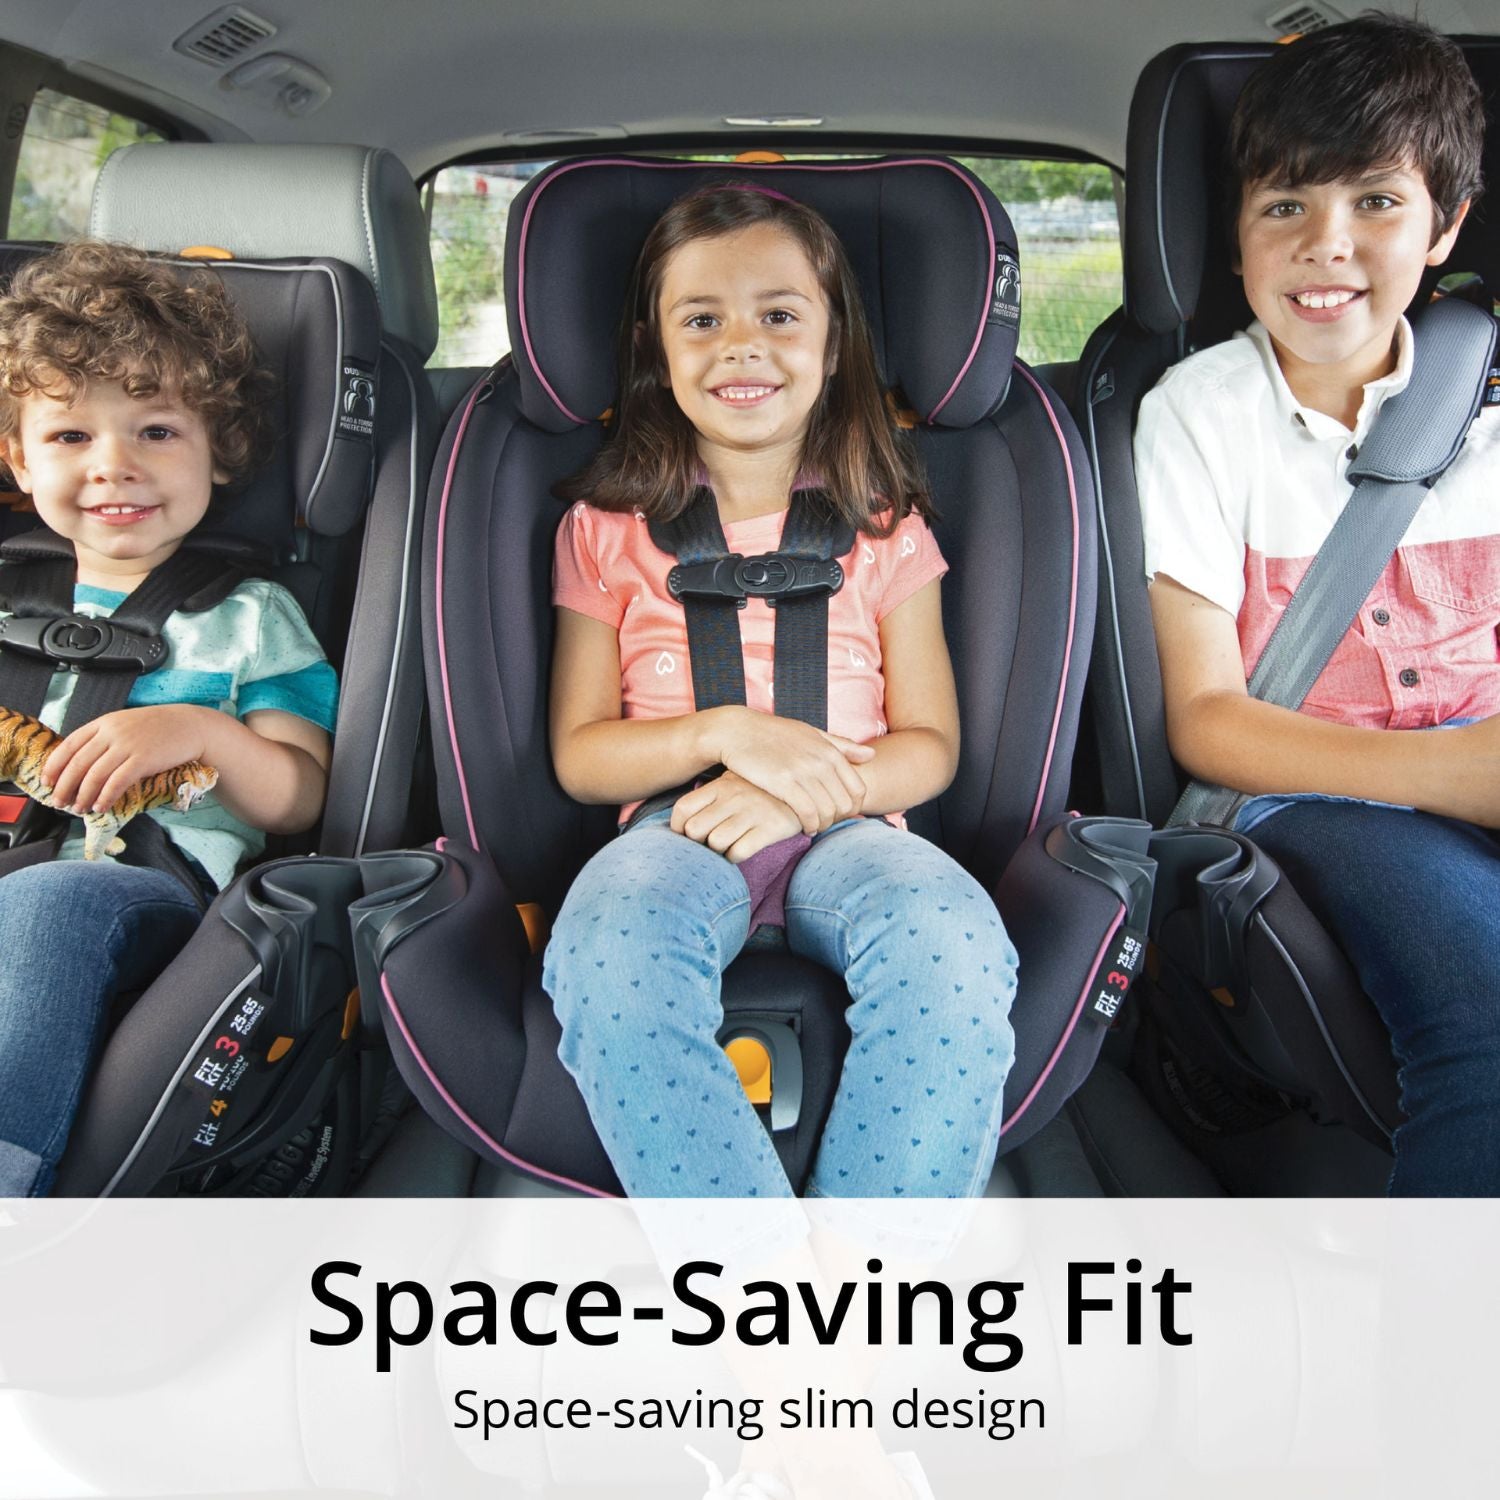 Fit4 4-in-1 Convertible Car Seat - Element